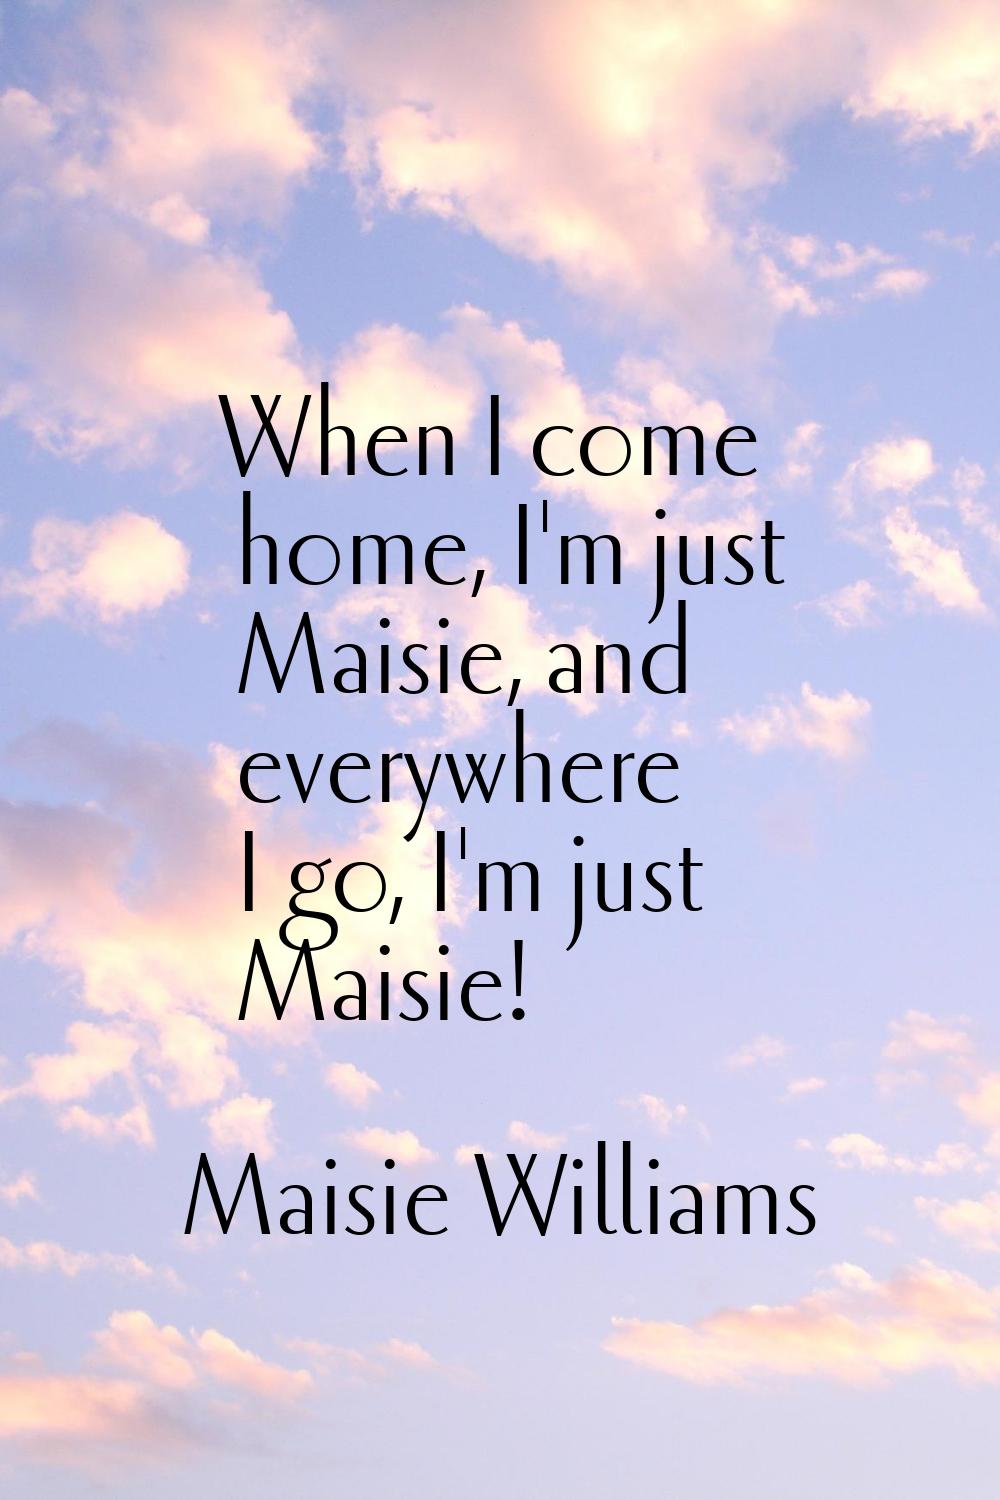 When I come home, I'm just Maisie, and everywhere I go, I'm just Maisie!